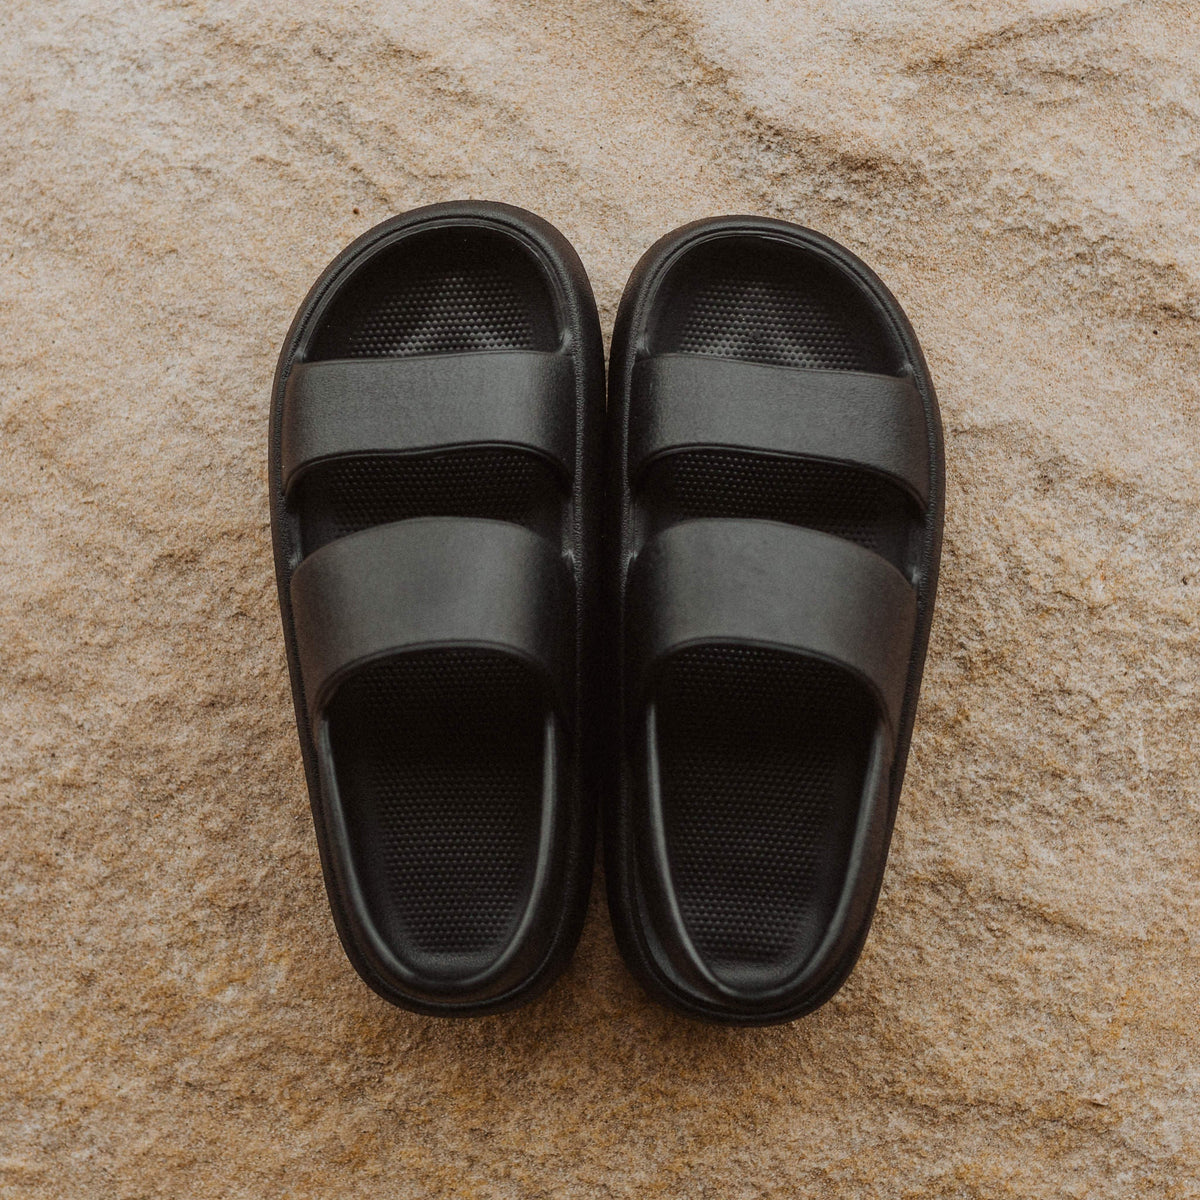 Black Stealth Nomad Shoes, Lightweight & Waterproof Sandals & Slides For All Terrain, RubbaBubba